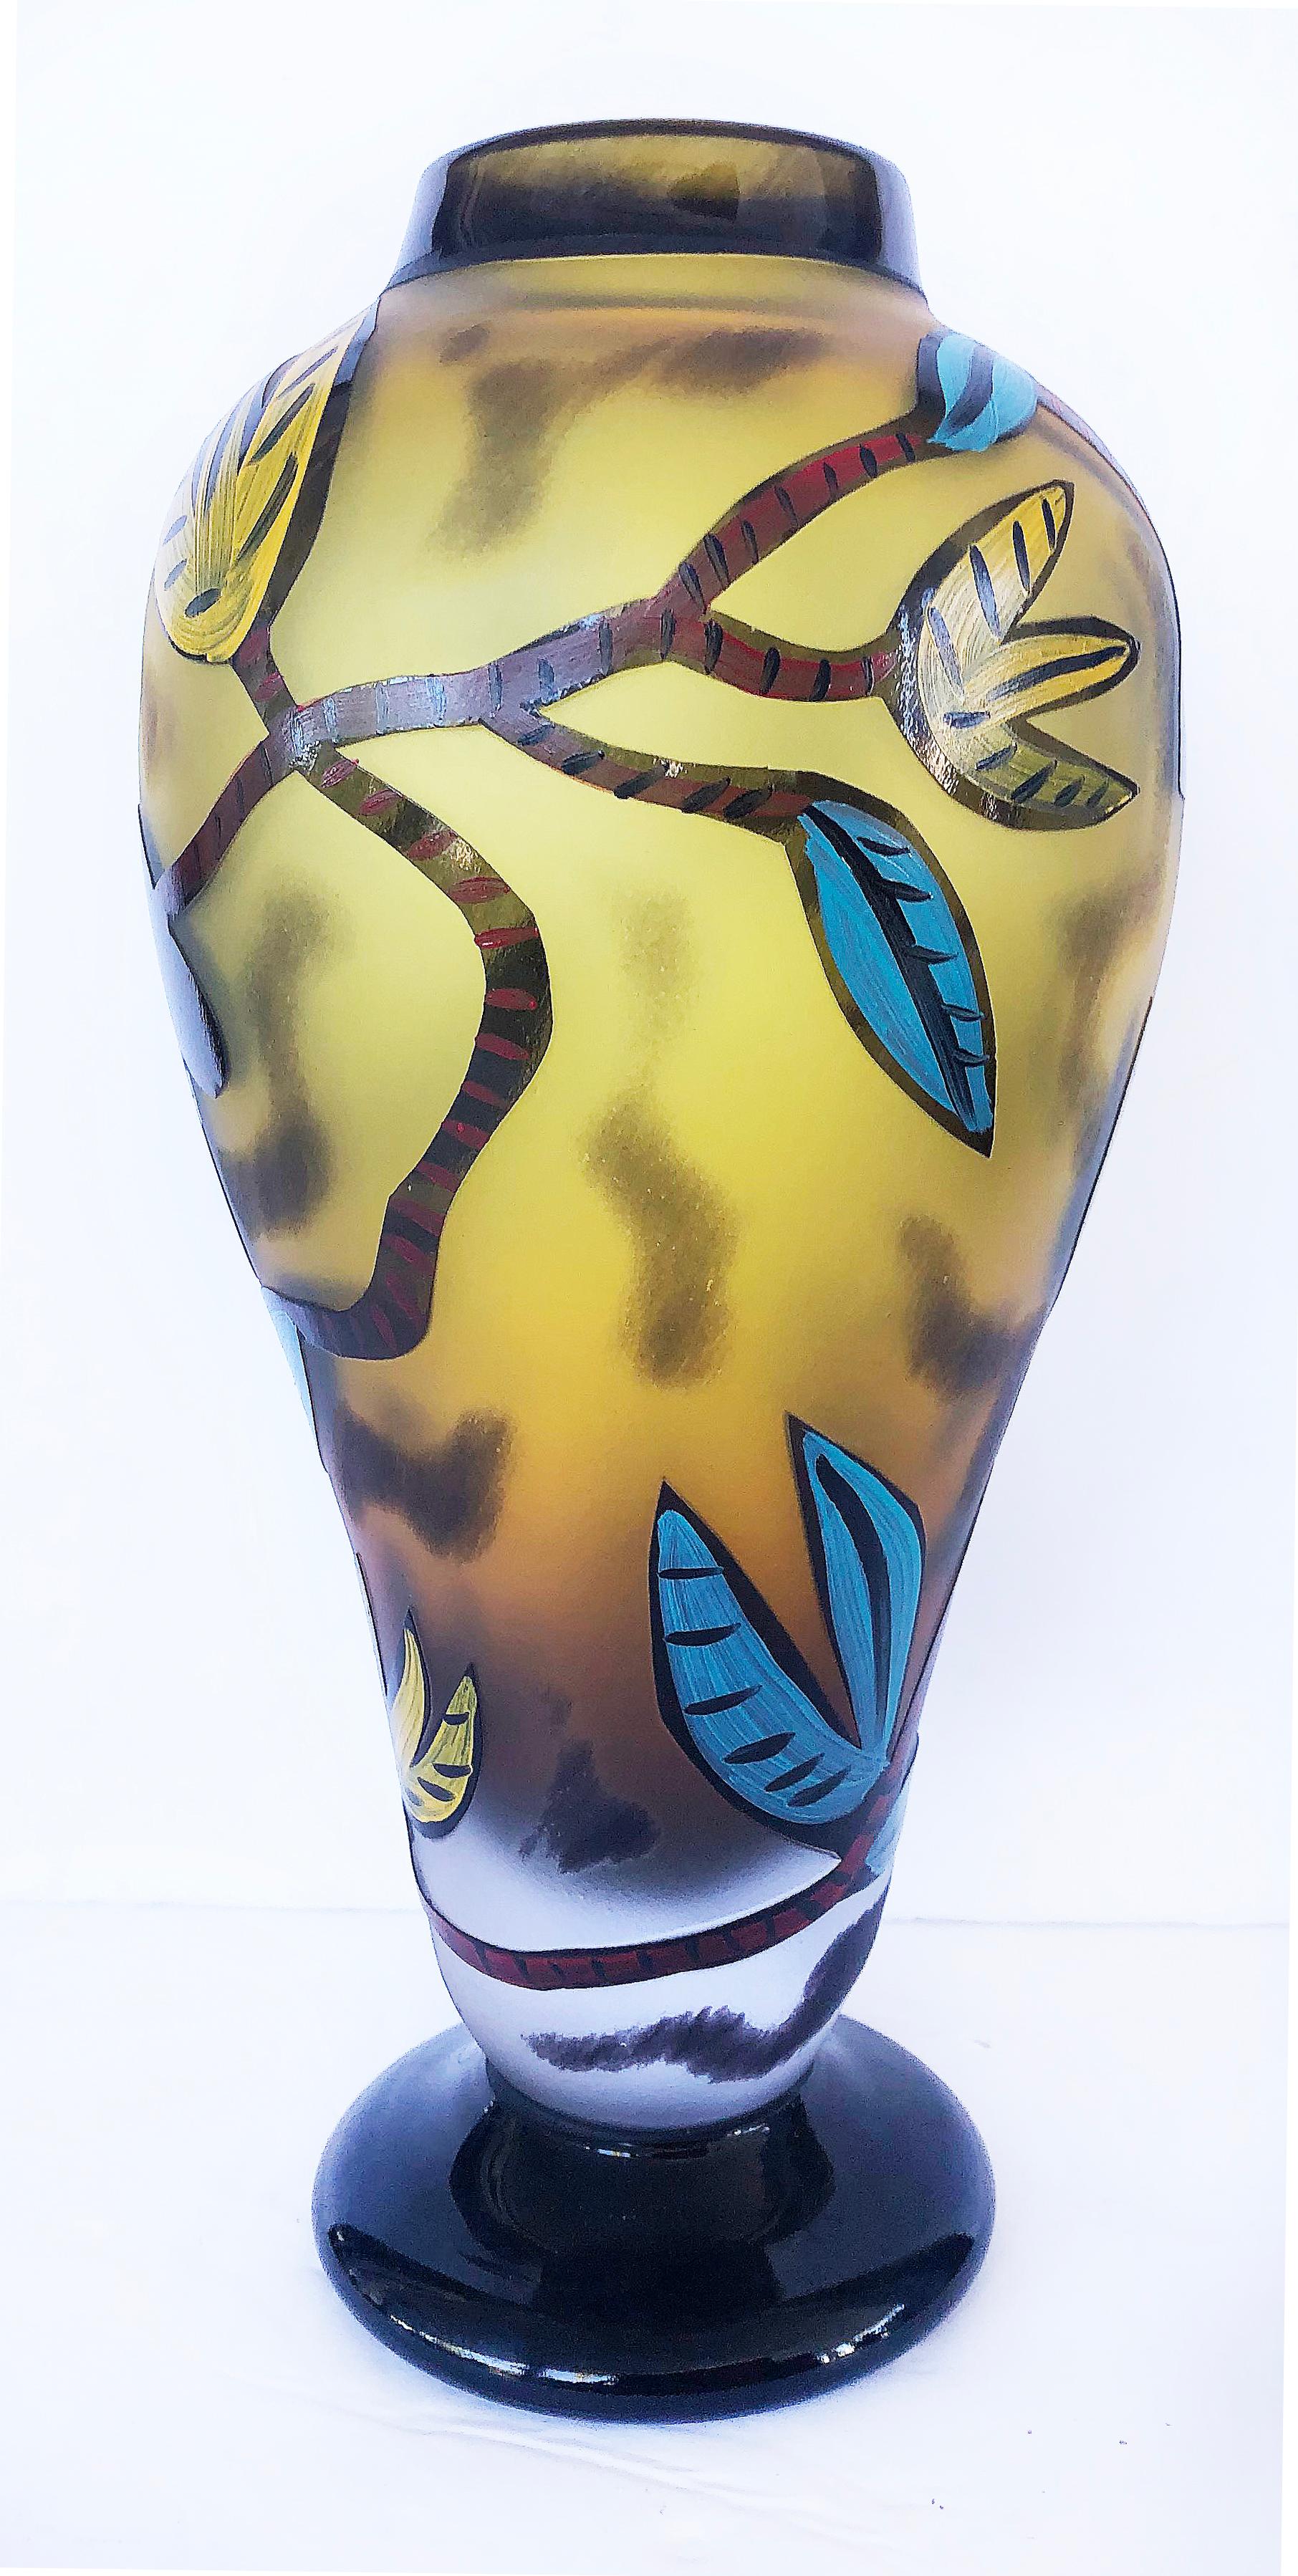 Vintage Ulrica Hydman-Vallien Kosta Boda art glass vase

Offered for sale is a very unusual Ulrica Hydman-Vallien Kosta Boda art glass vase. The form of the vase, as well as the painting, are really quite striking. The vase is signed and numbered